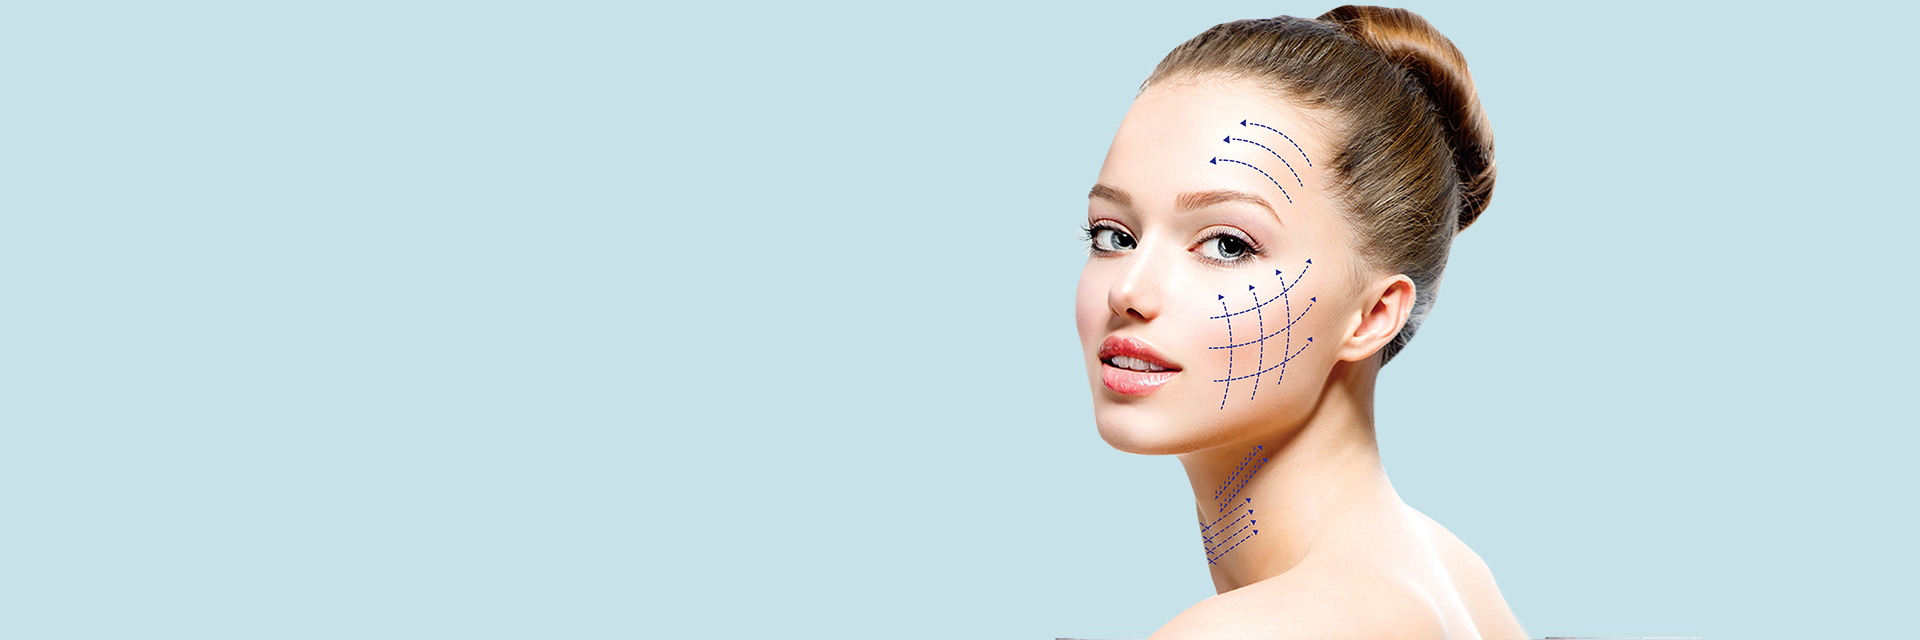 Laser treatment for acne scar or tattoo removal